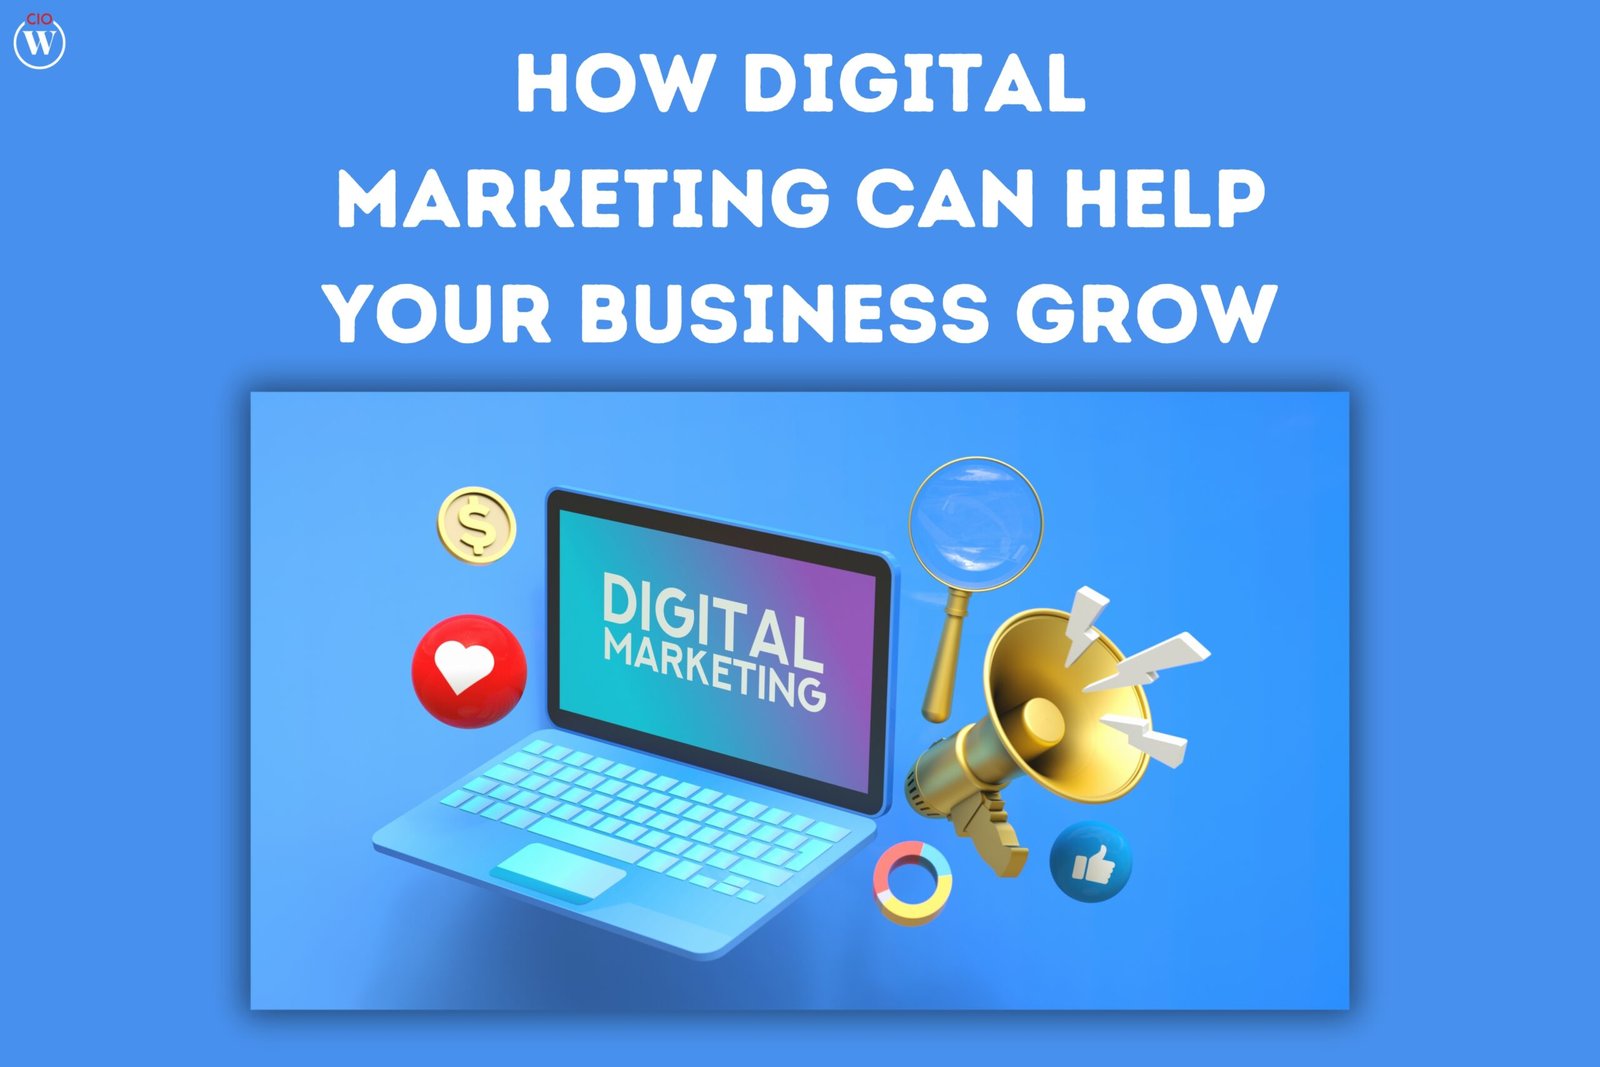 How Digital Marketing Can Help Your Business Grow?